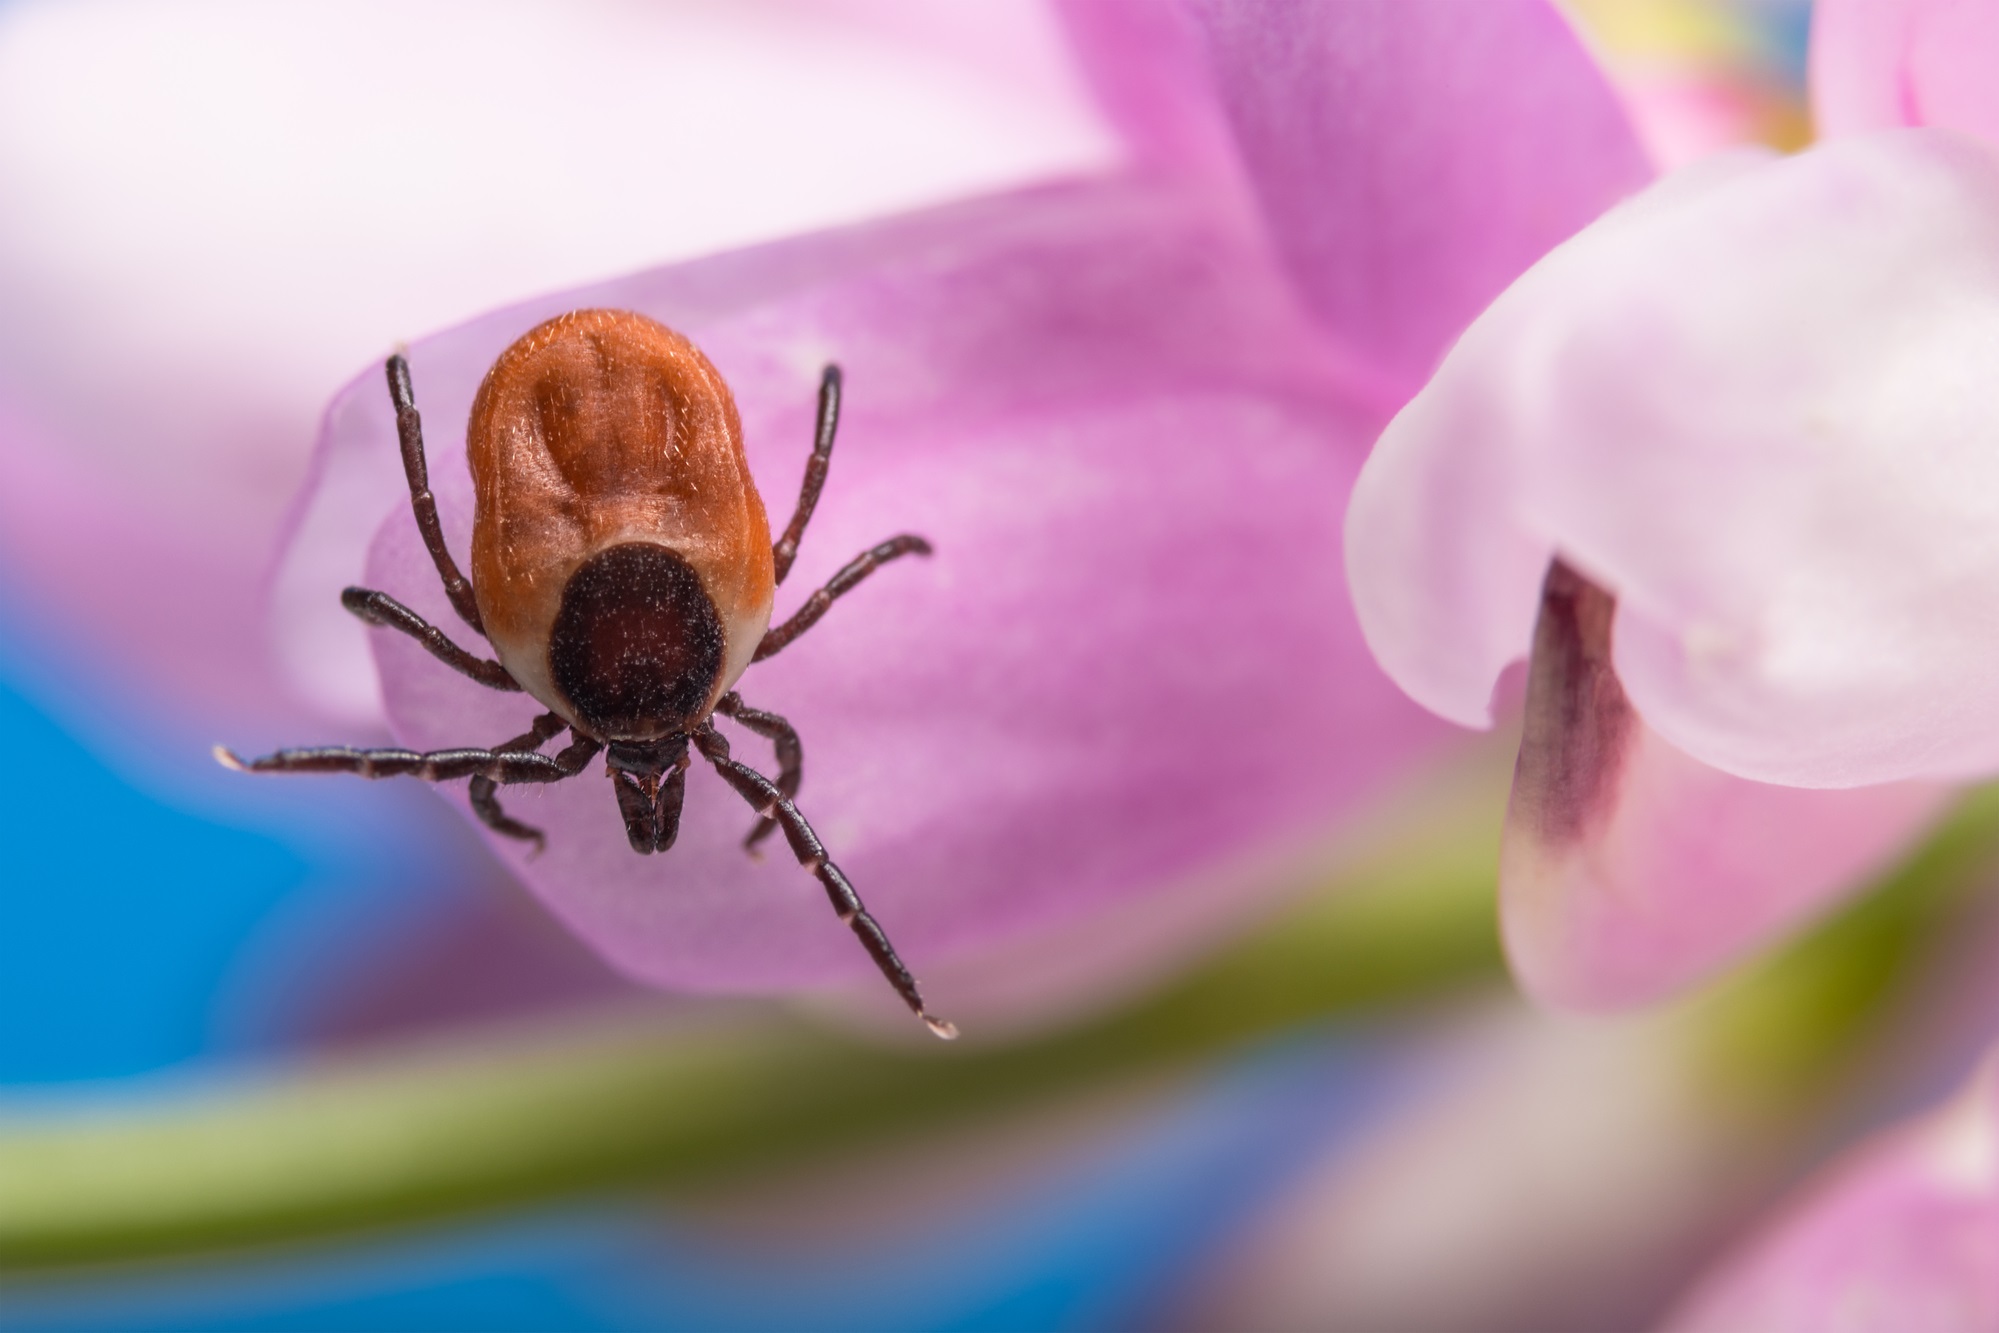 Biologists successfully hatched gene-edited ticks for the first time